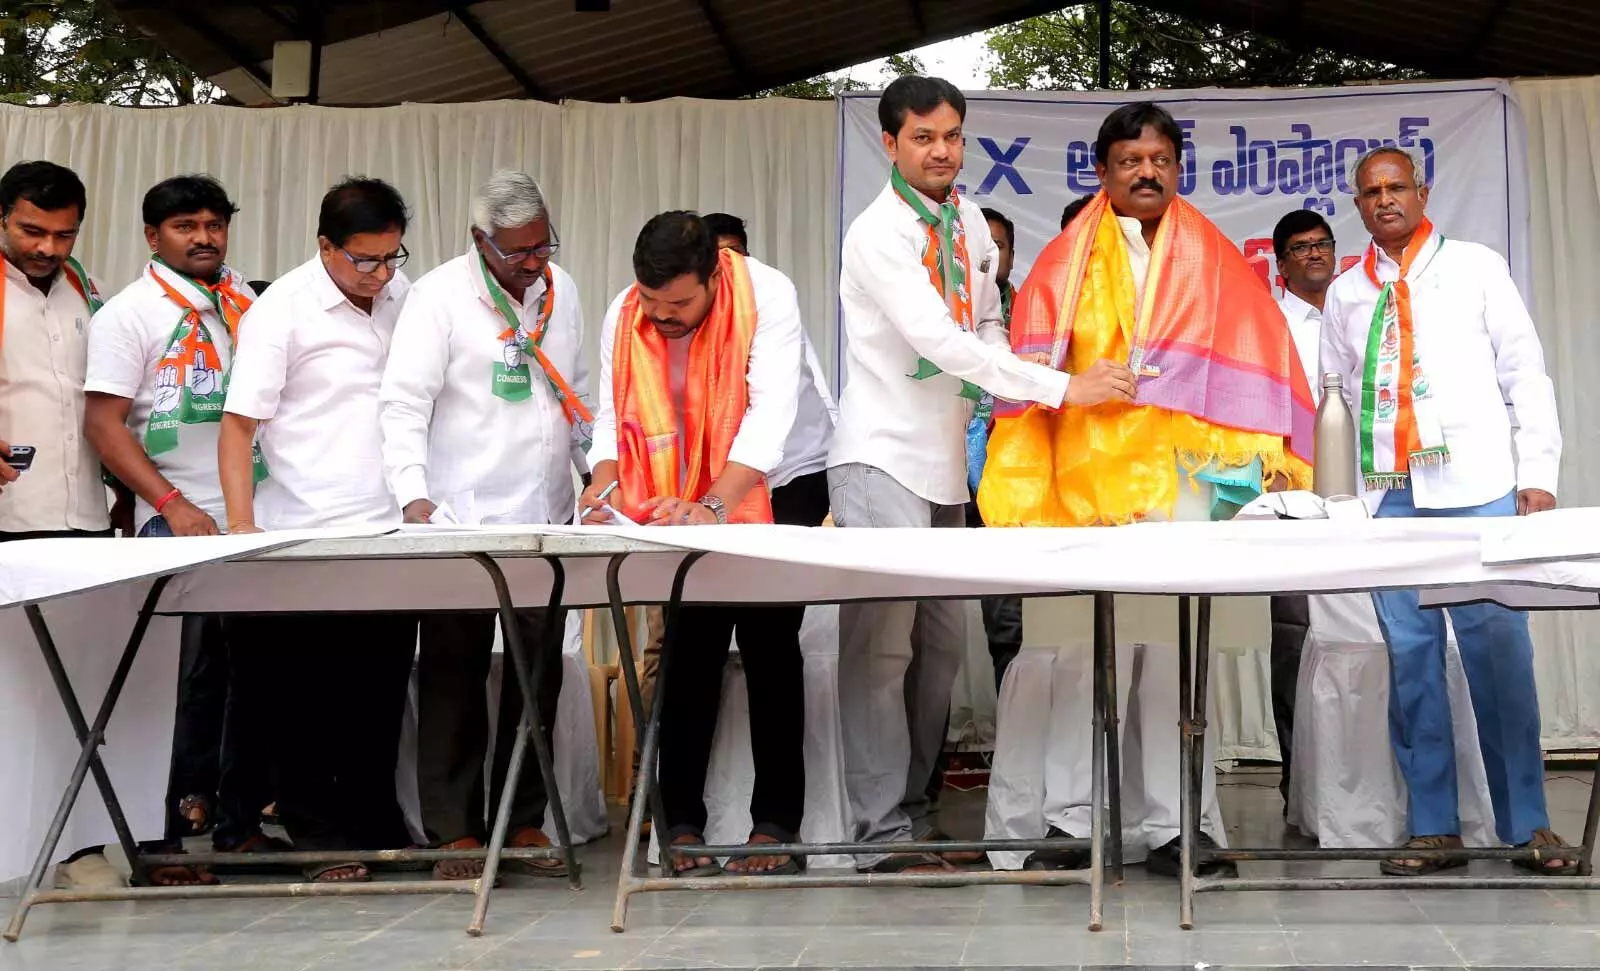 150 youths join Congress in Quthbullapur Constituency